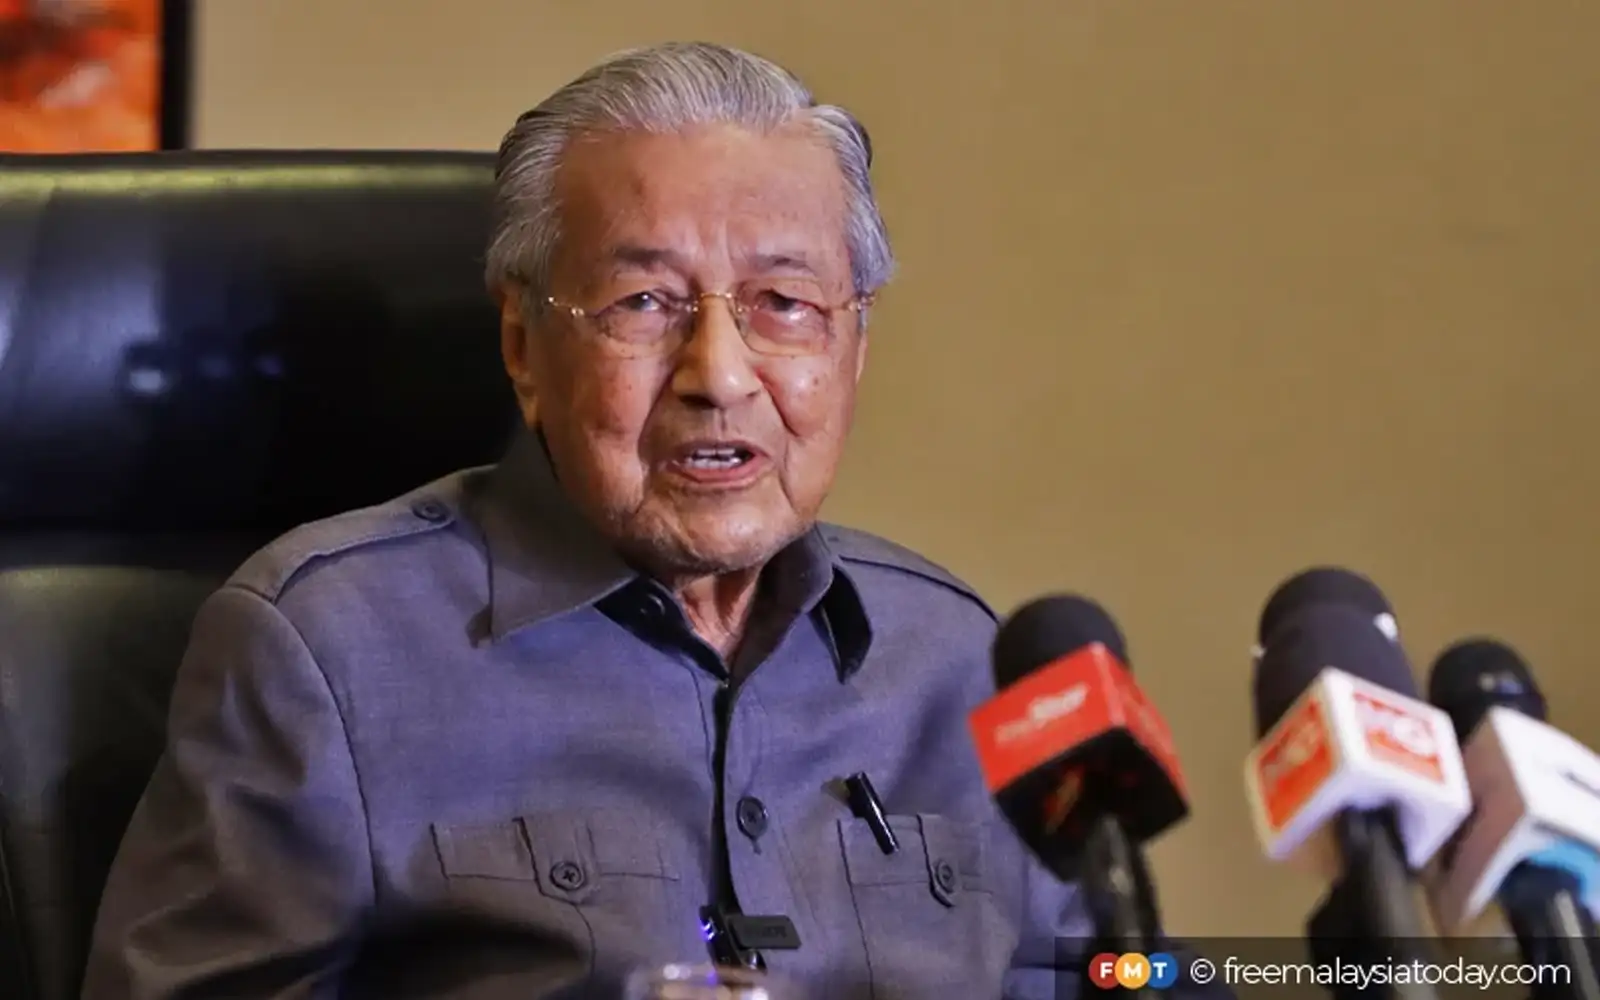 where’s the proof i’ve accumulated billions, asks dr m